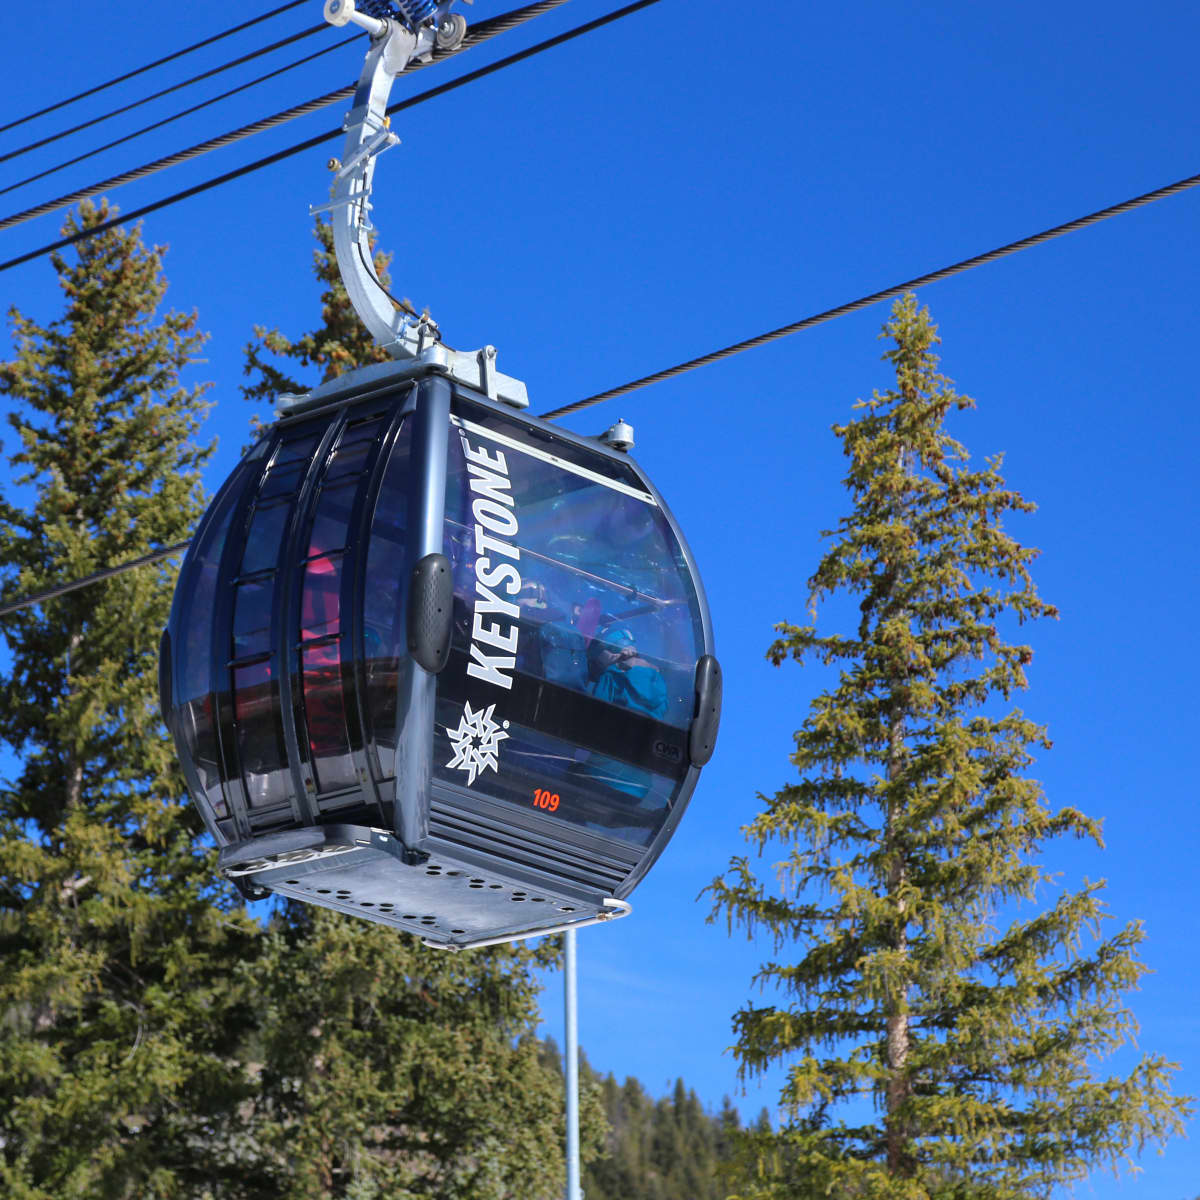 Keystone's New Lift Is Set to Make Advanced Terrain More Accessible